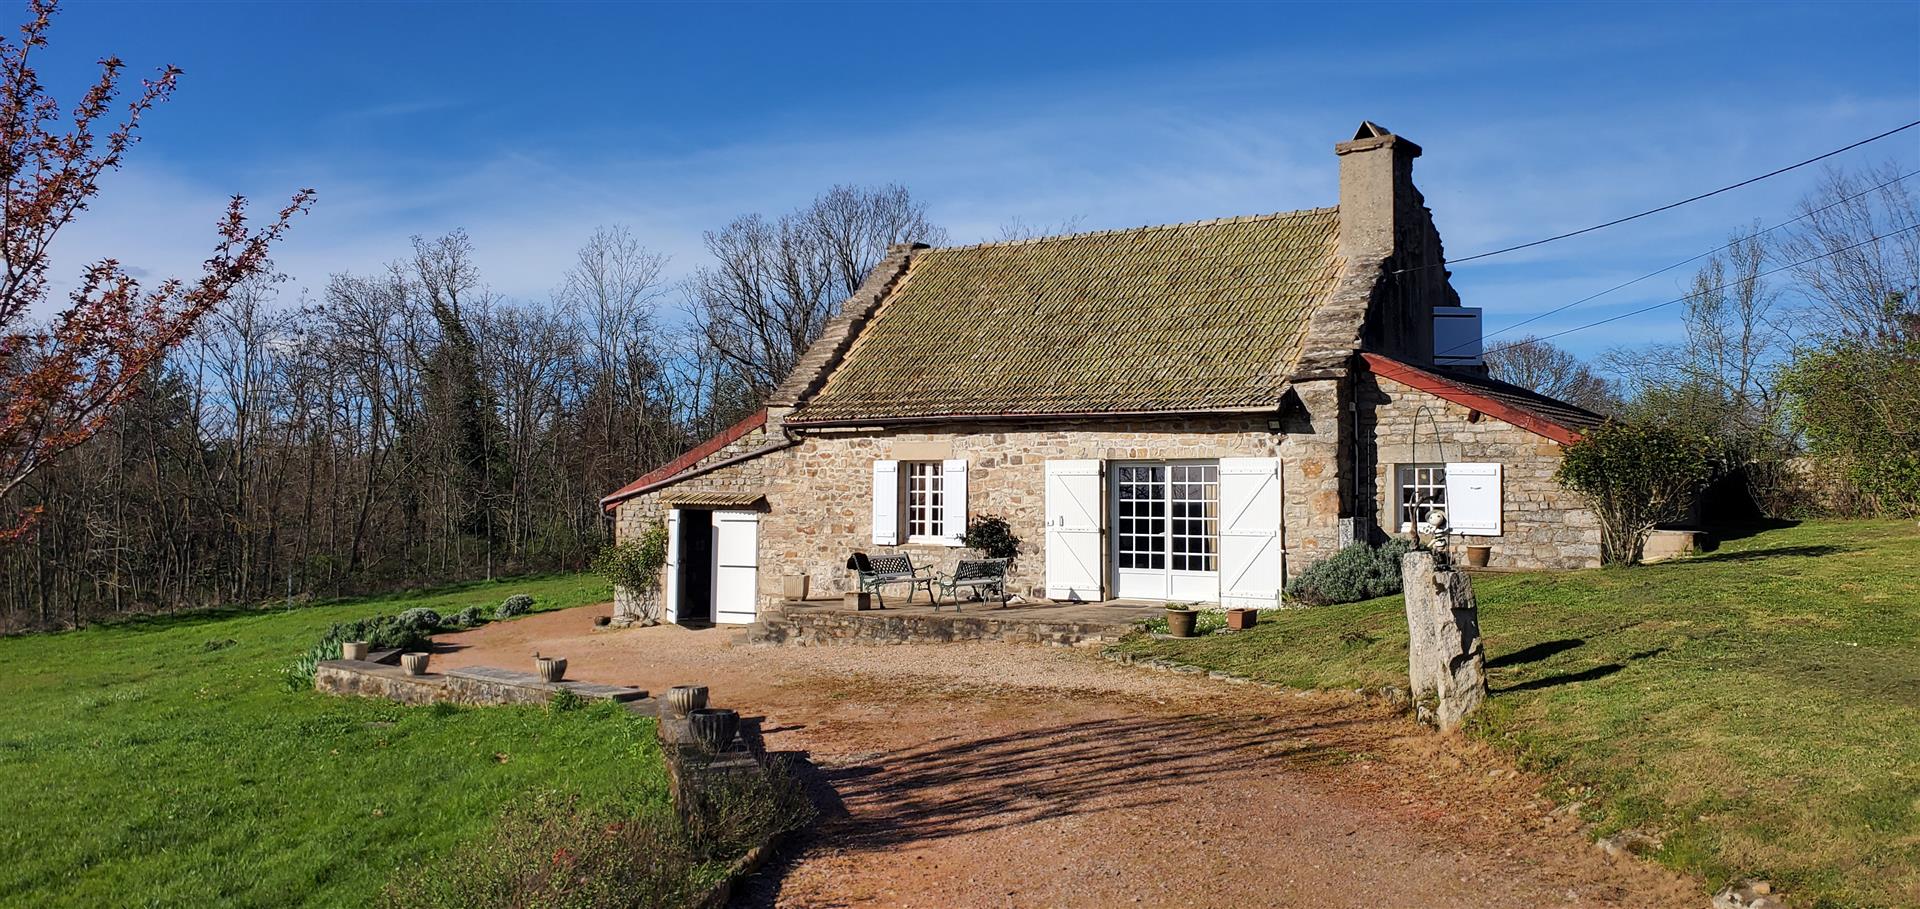 Charming little stone-built house in a rural setting